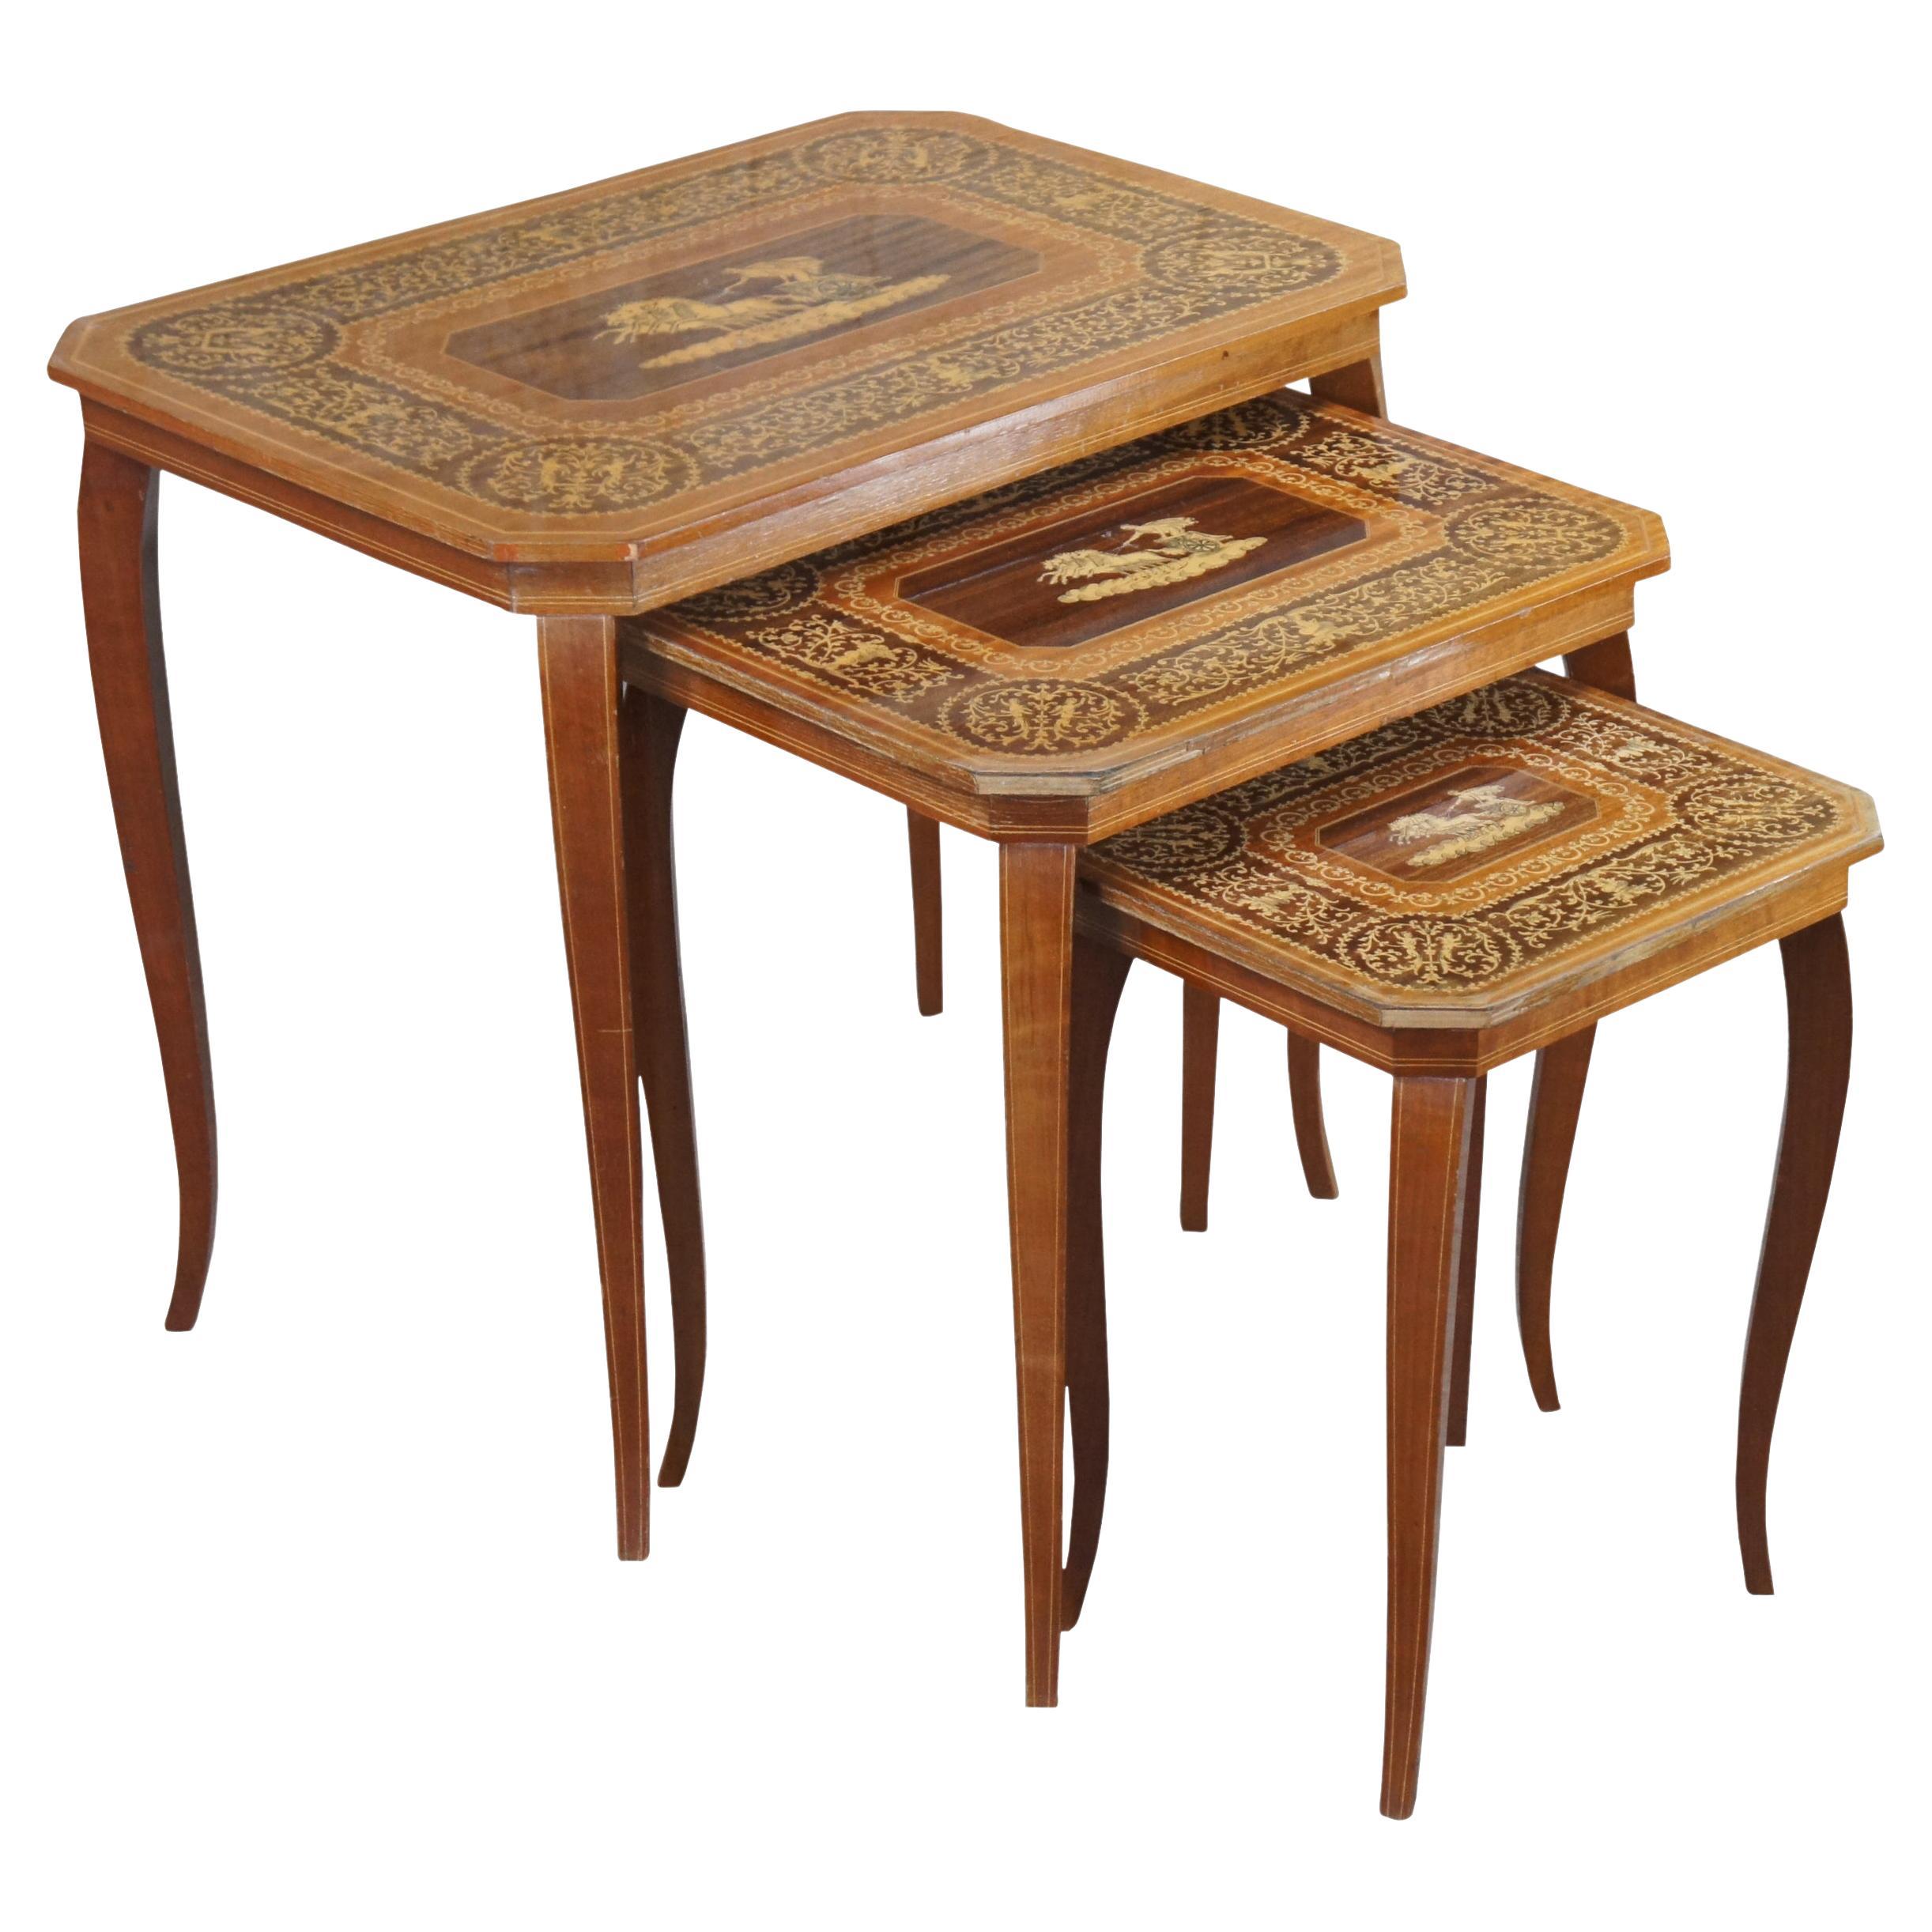 3 Vintage Inlaid Satinwood Italian Neo-Grec Neoclassical Nesting Side Tables For Sale